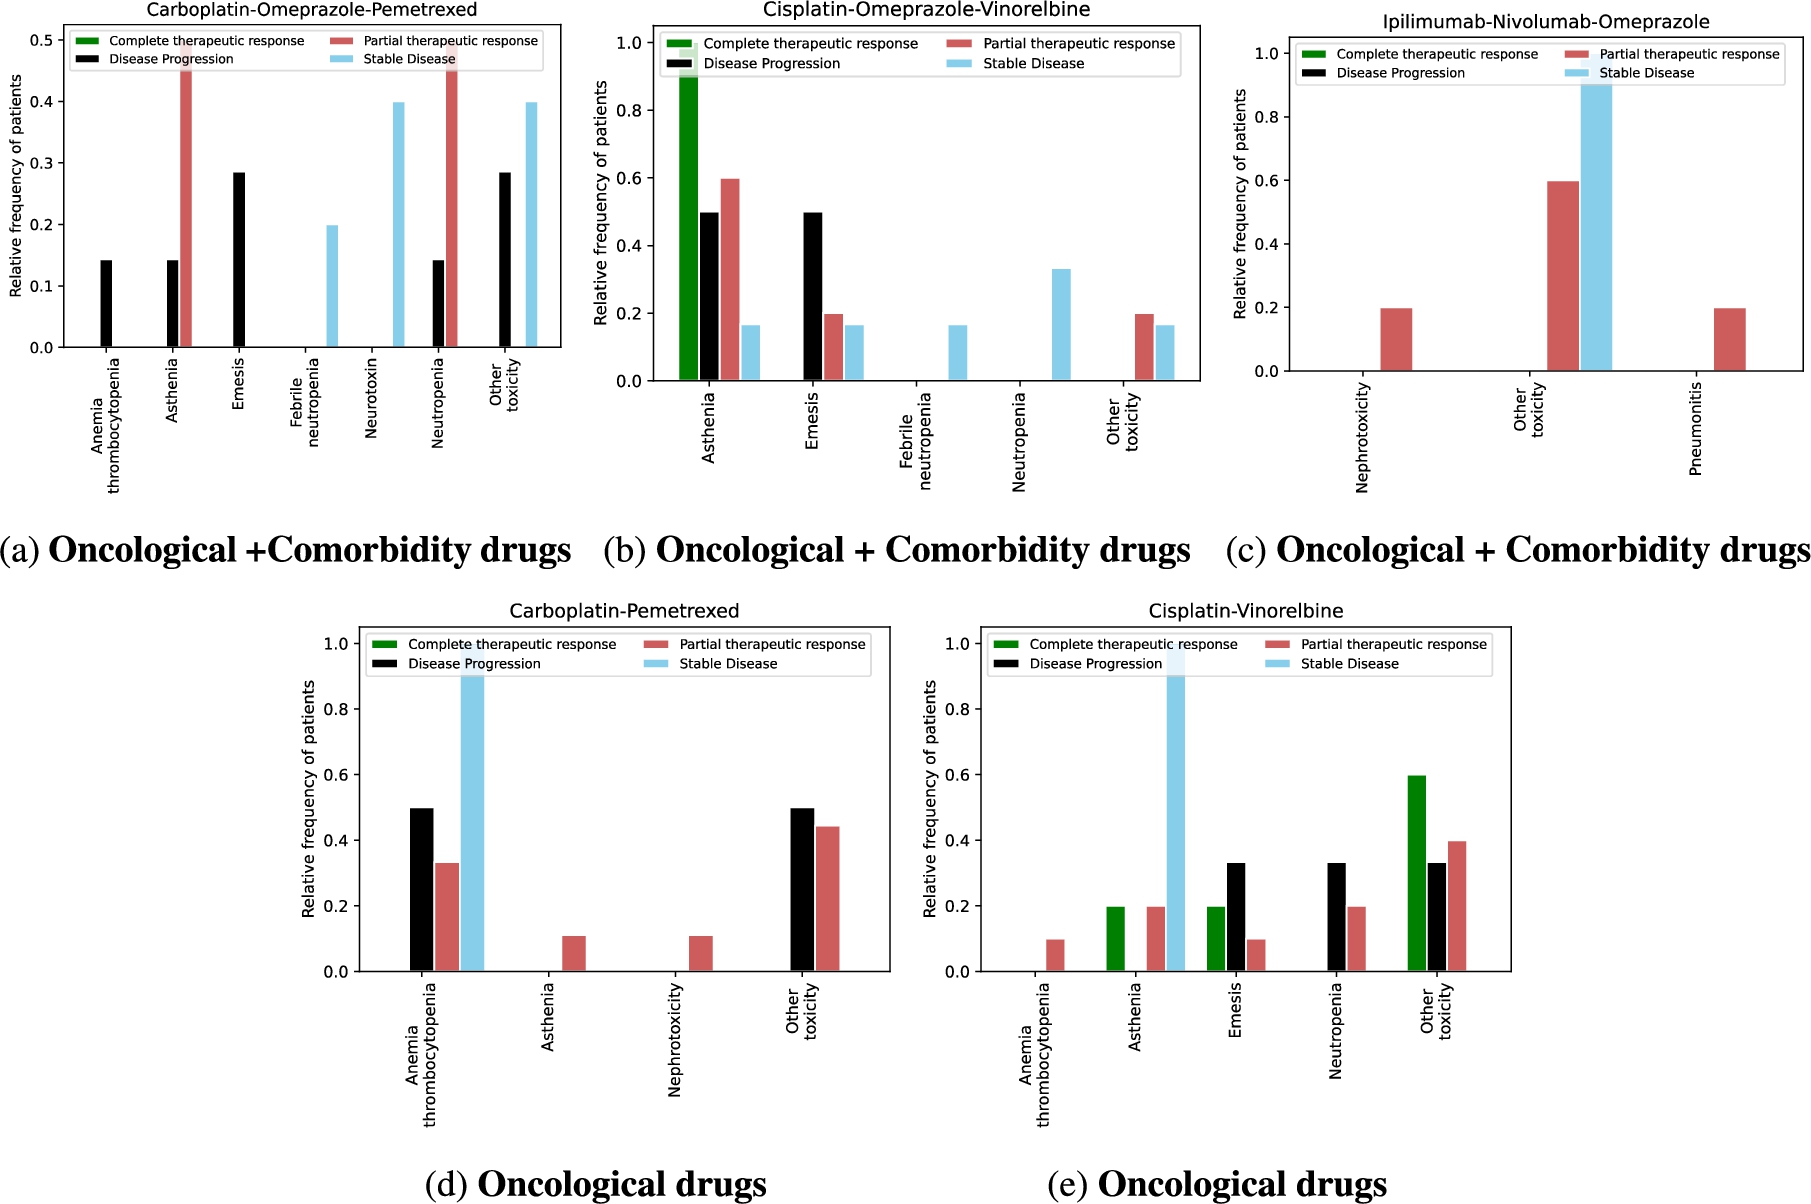 Toxicity analysis of oncological treatments. Figure 9 shows five bar plots of the toxicities produced by treatments in lung cancer patients. The treatment responses are differentiated by color. The oncological treatments with comorbidity drugs generate more toxicities than those without comorbidity drugs.